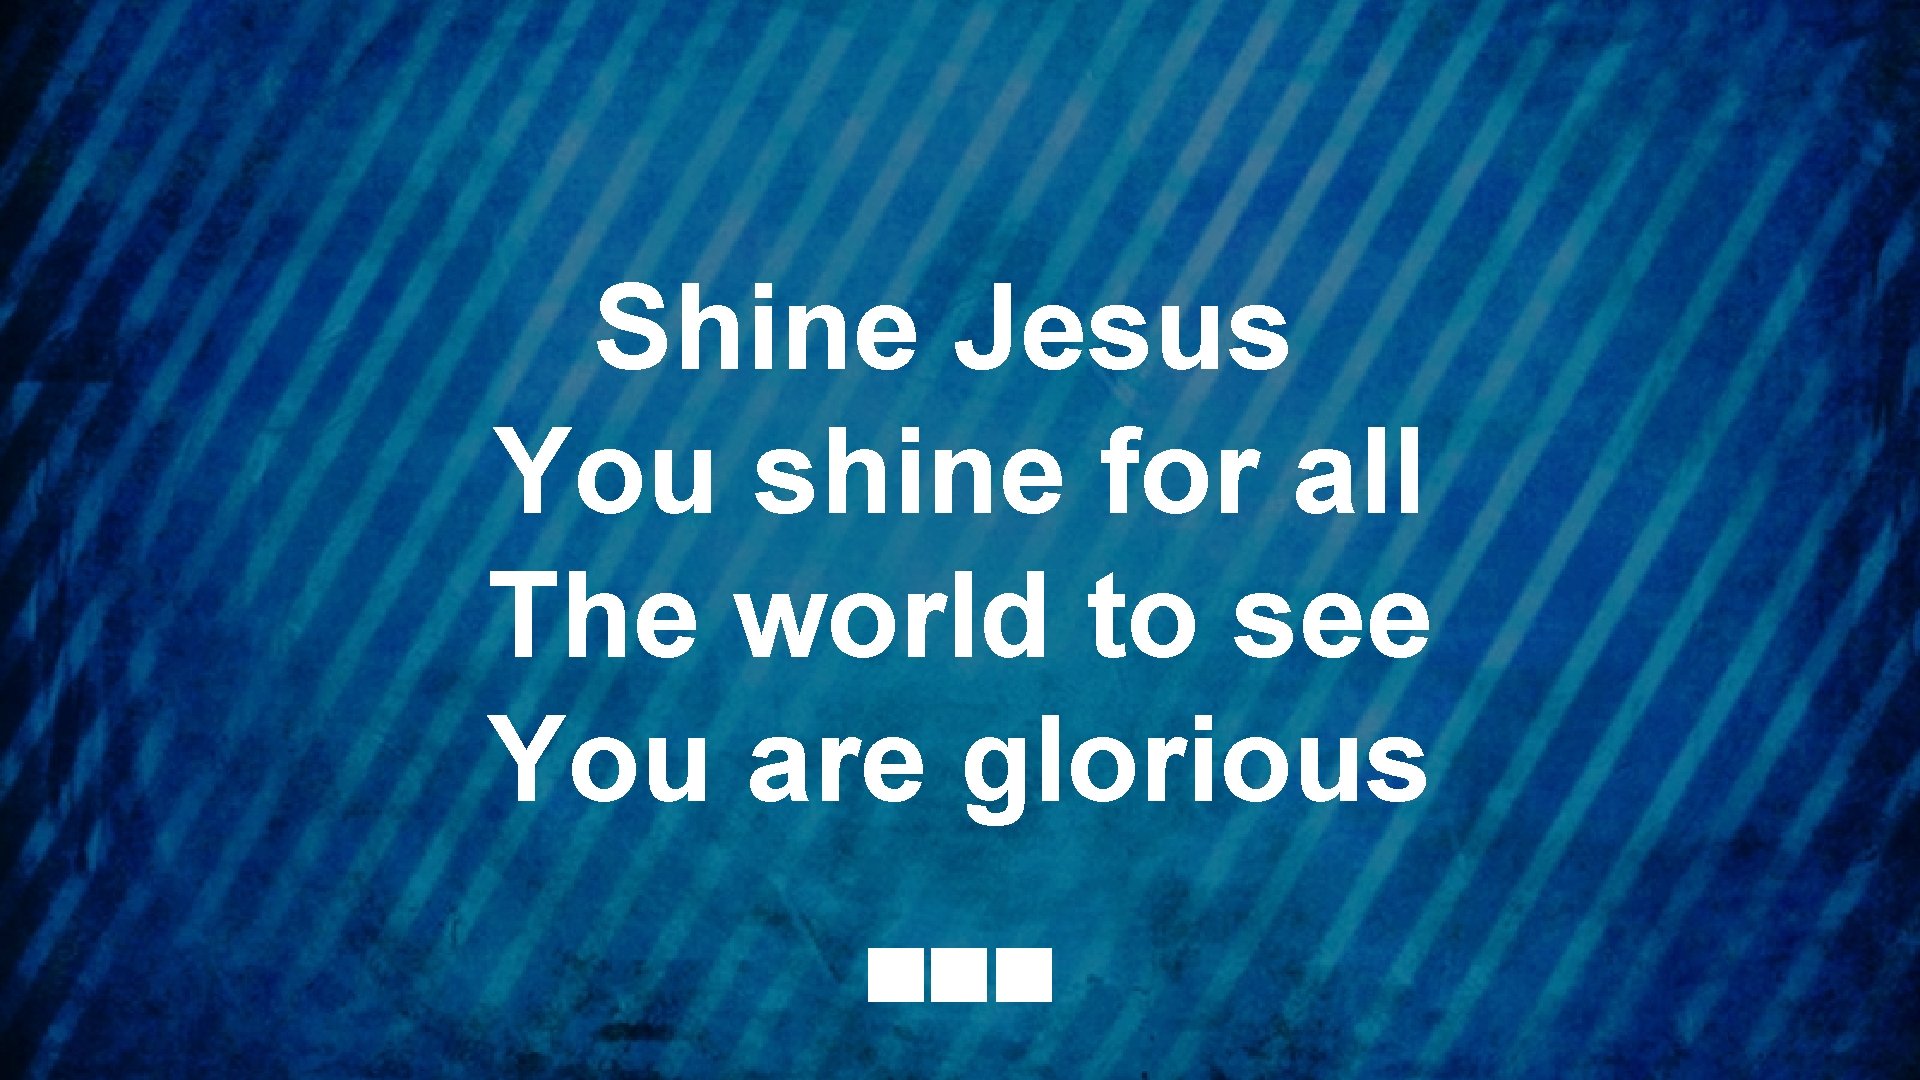 Shine Jesus You shine for all The world to see You are glorious 